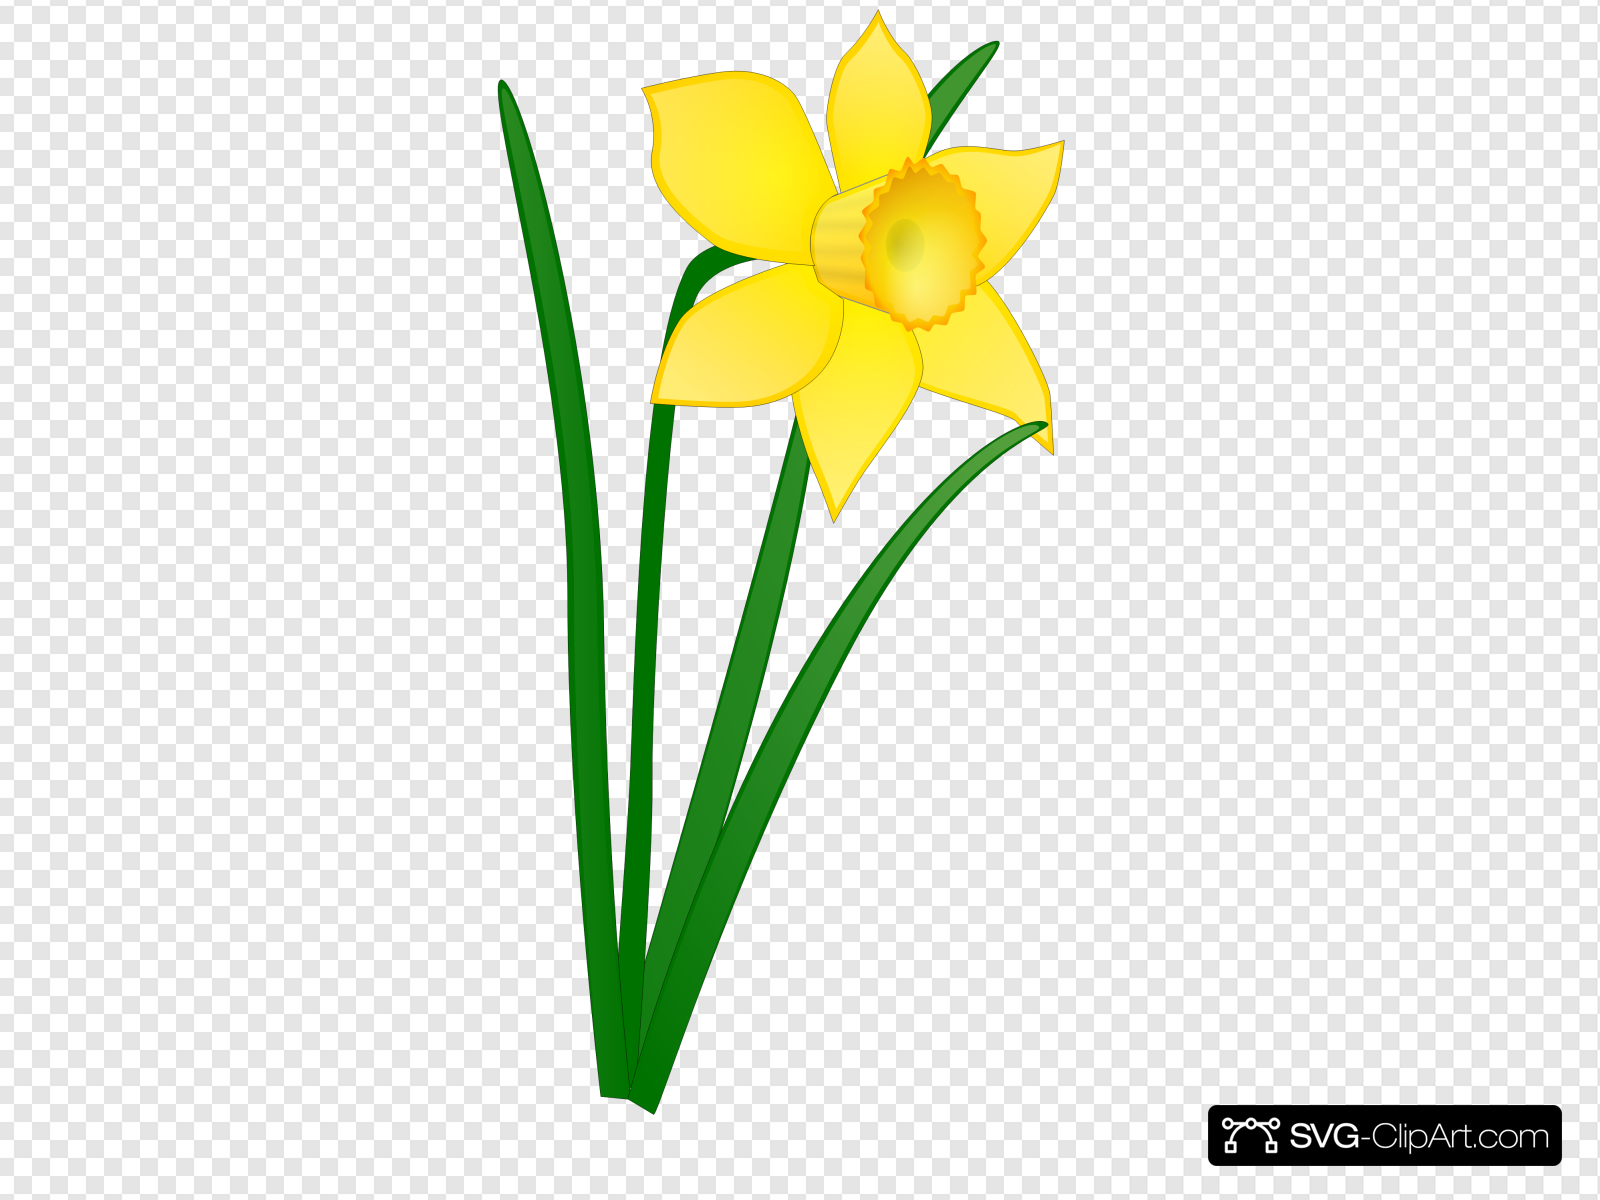 Daffodil clipart svg, Daffodil svg Transparent FREE for download on ...